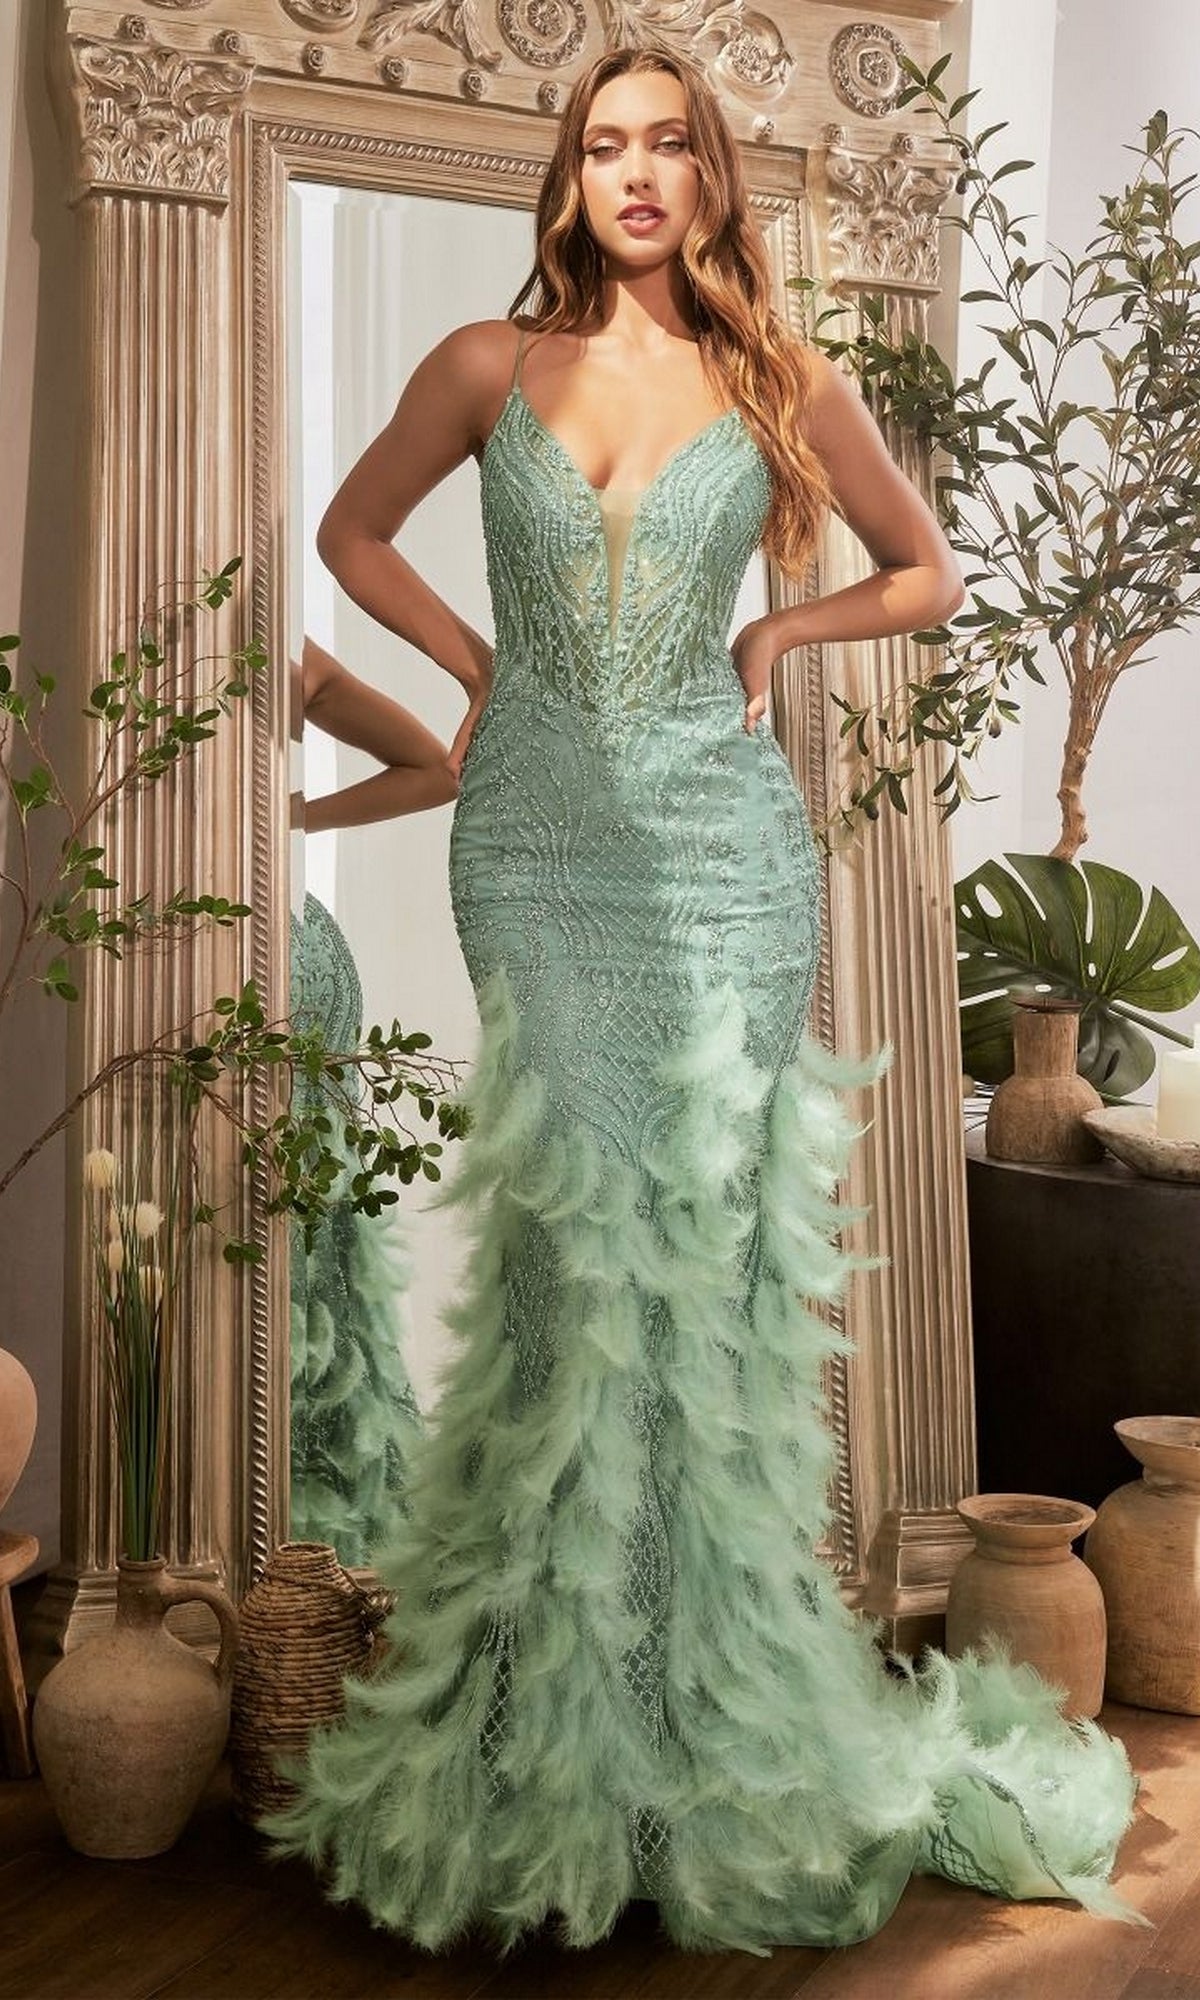 Feather-Trimmed Glitter-Print Long Prom Dress CC1608